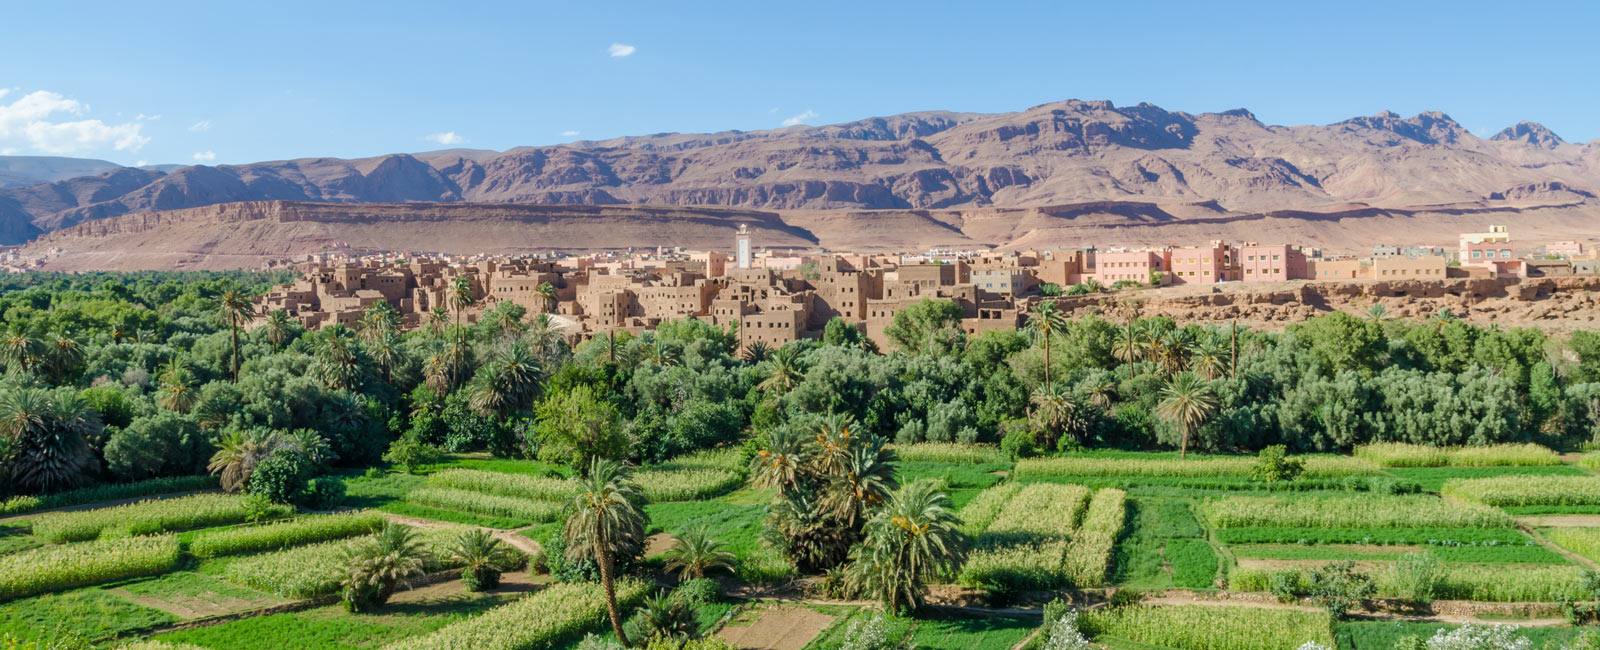 IFOAM – Organics International Supporting the Growth of Organic in Morocco